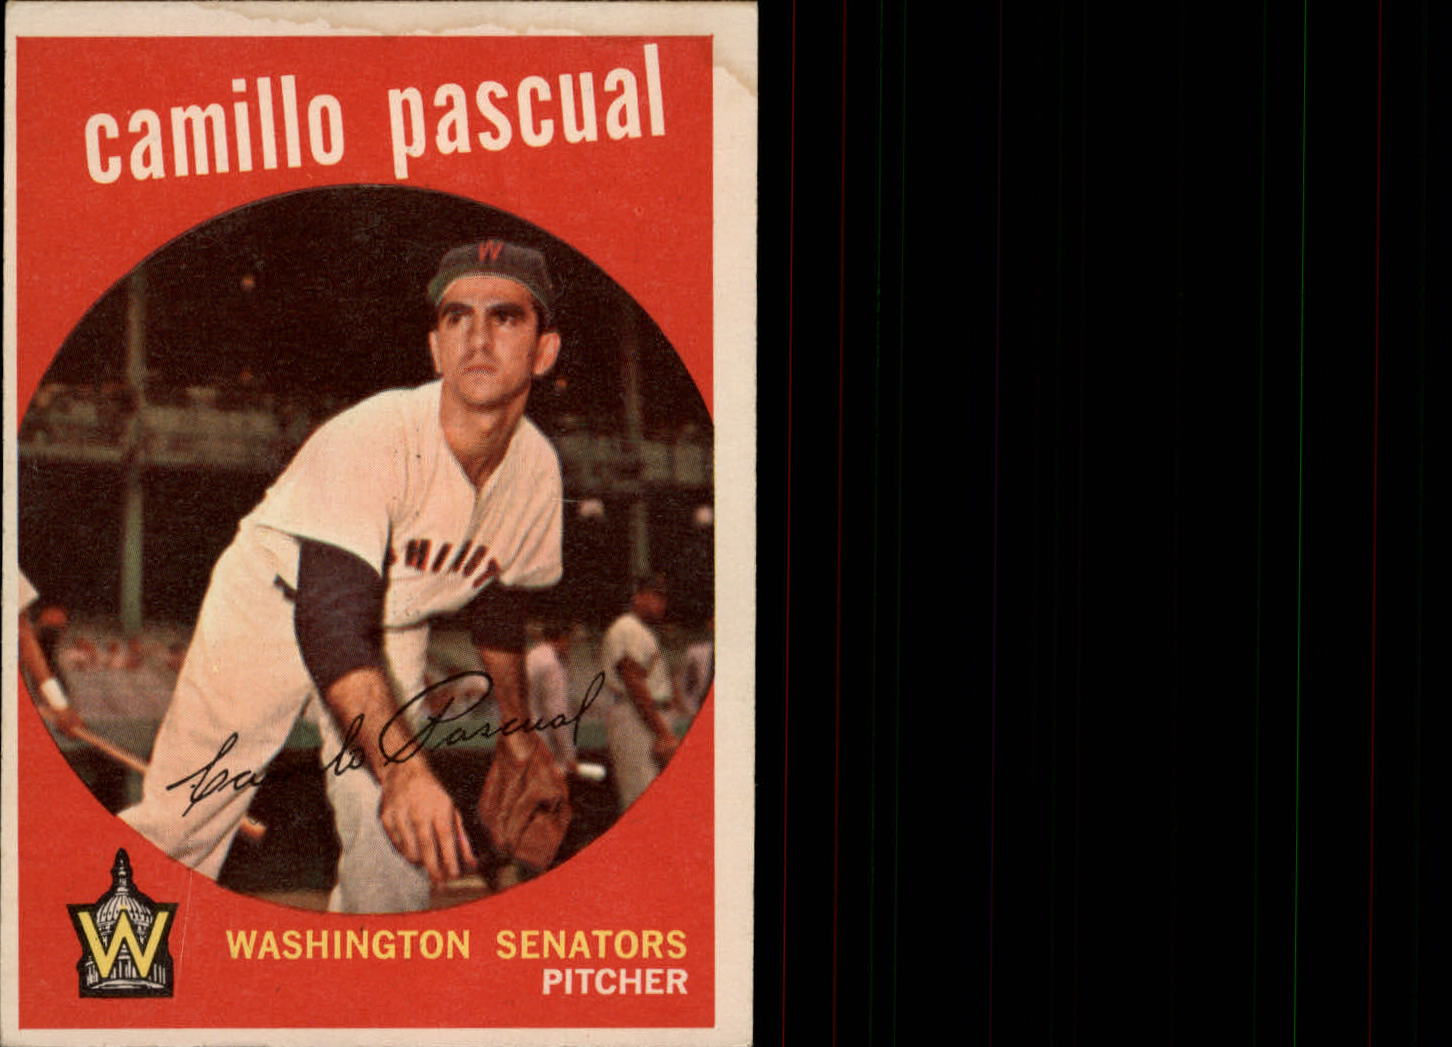 1959 Topps #413 Camilo Pascual UER/Listed as Camillo/on front and Pasqual/on back